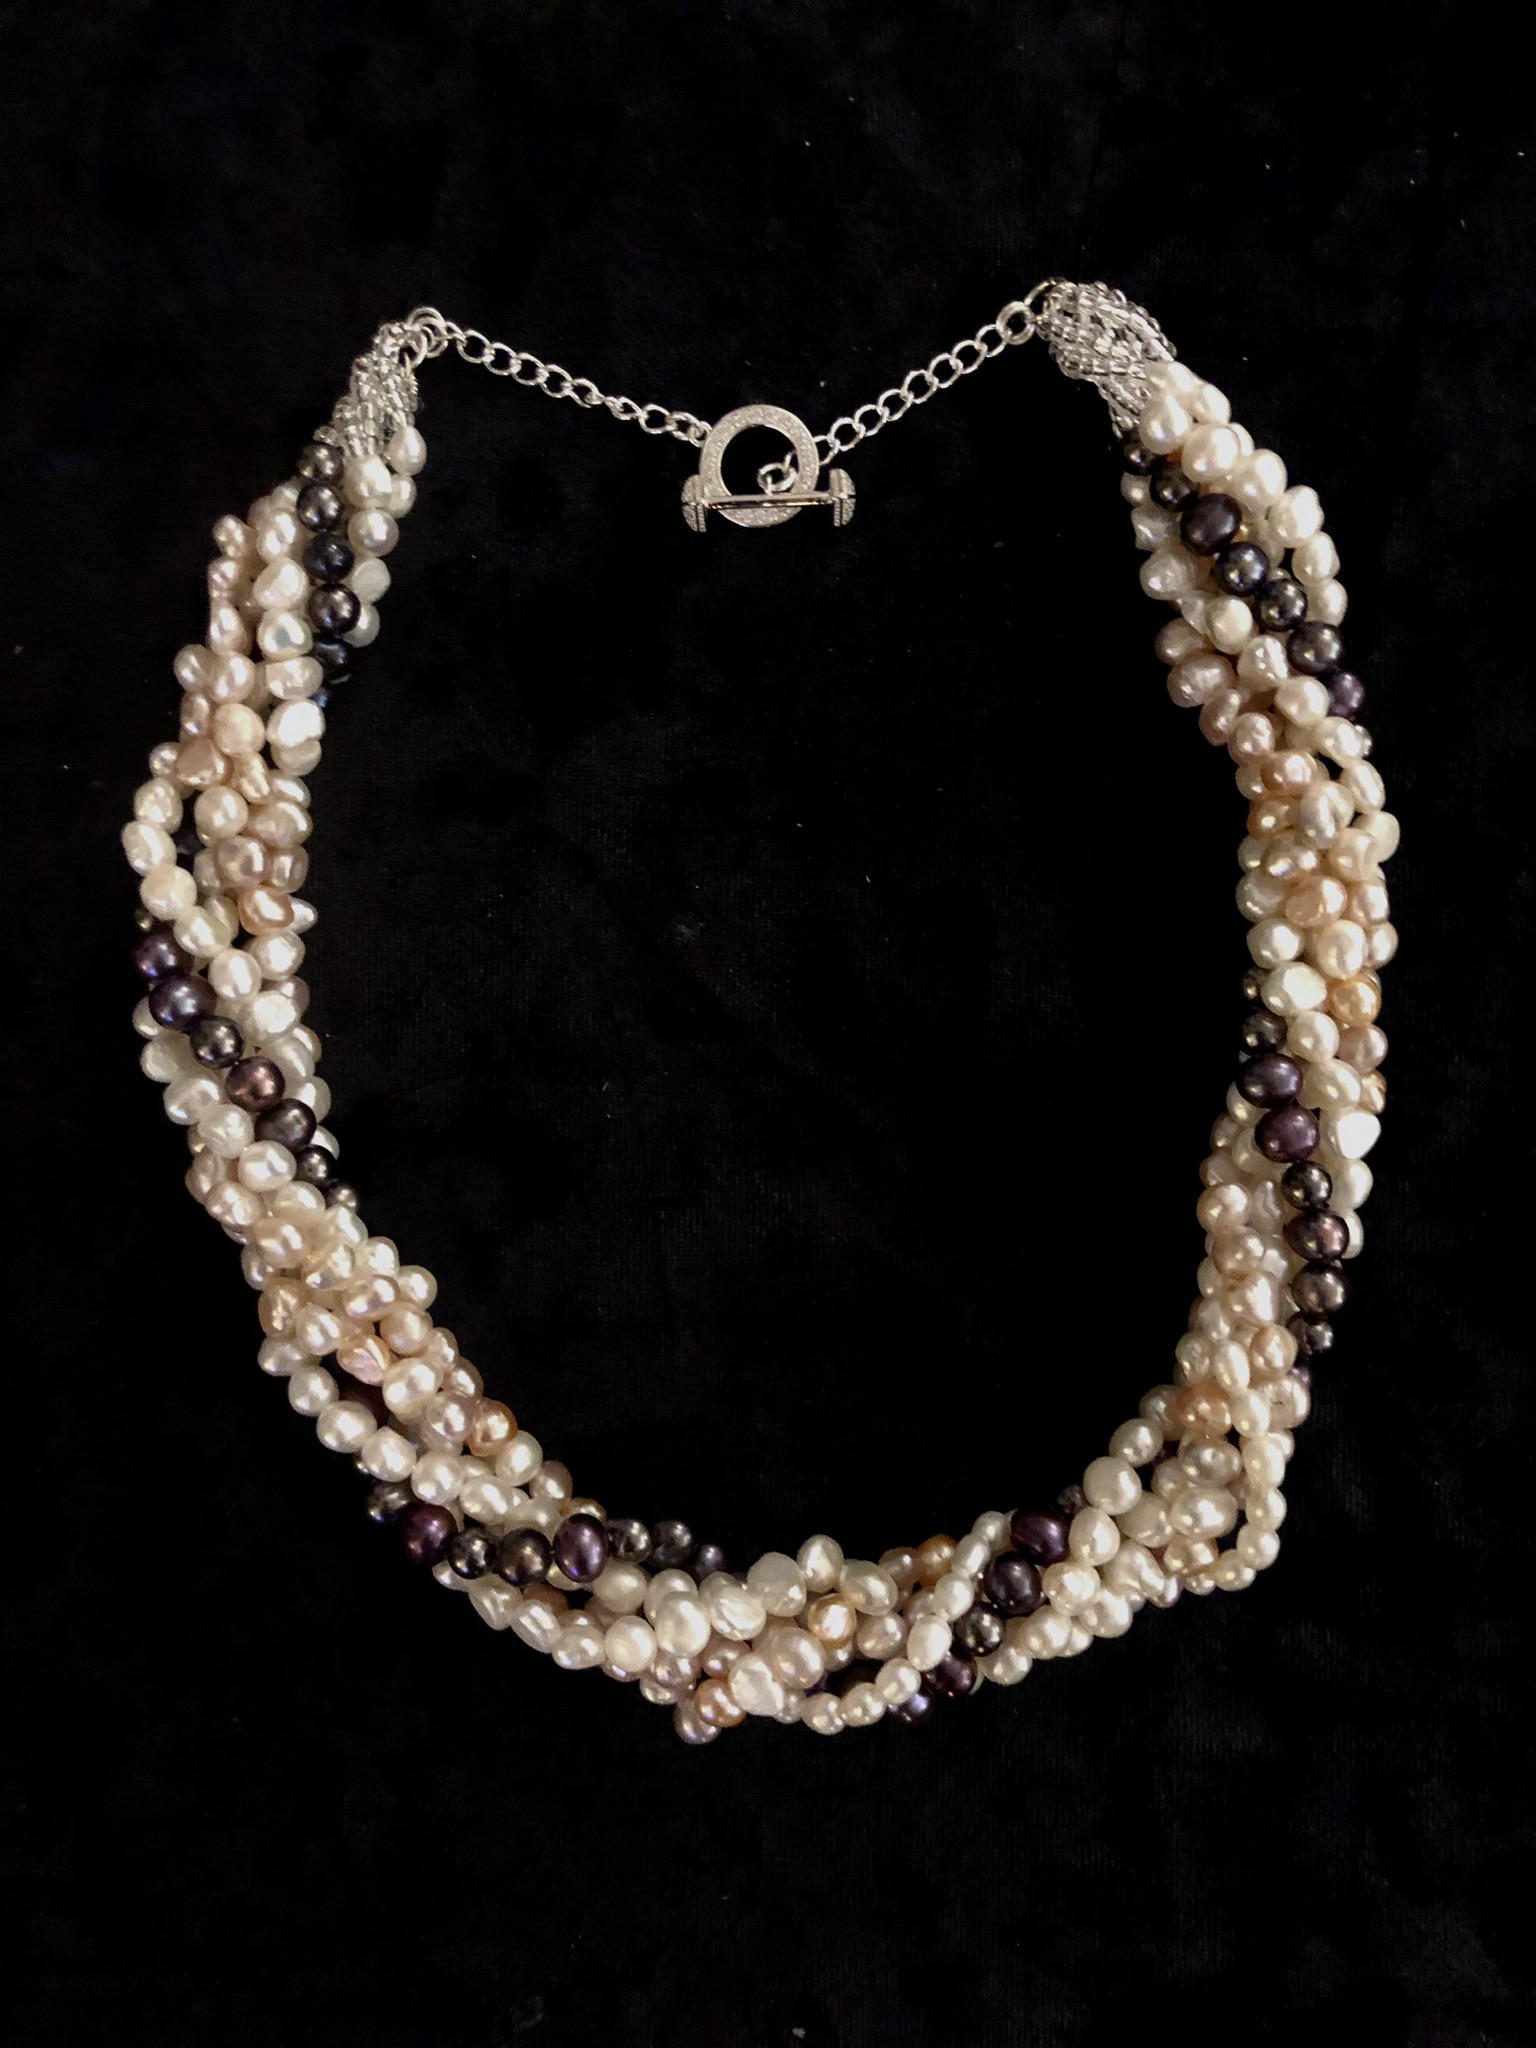 Six Strand Freshwater Pearl Twist Necklace - Jewels and Hats